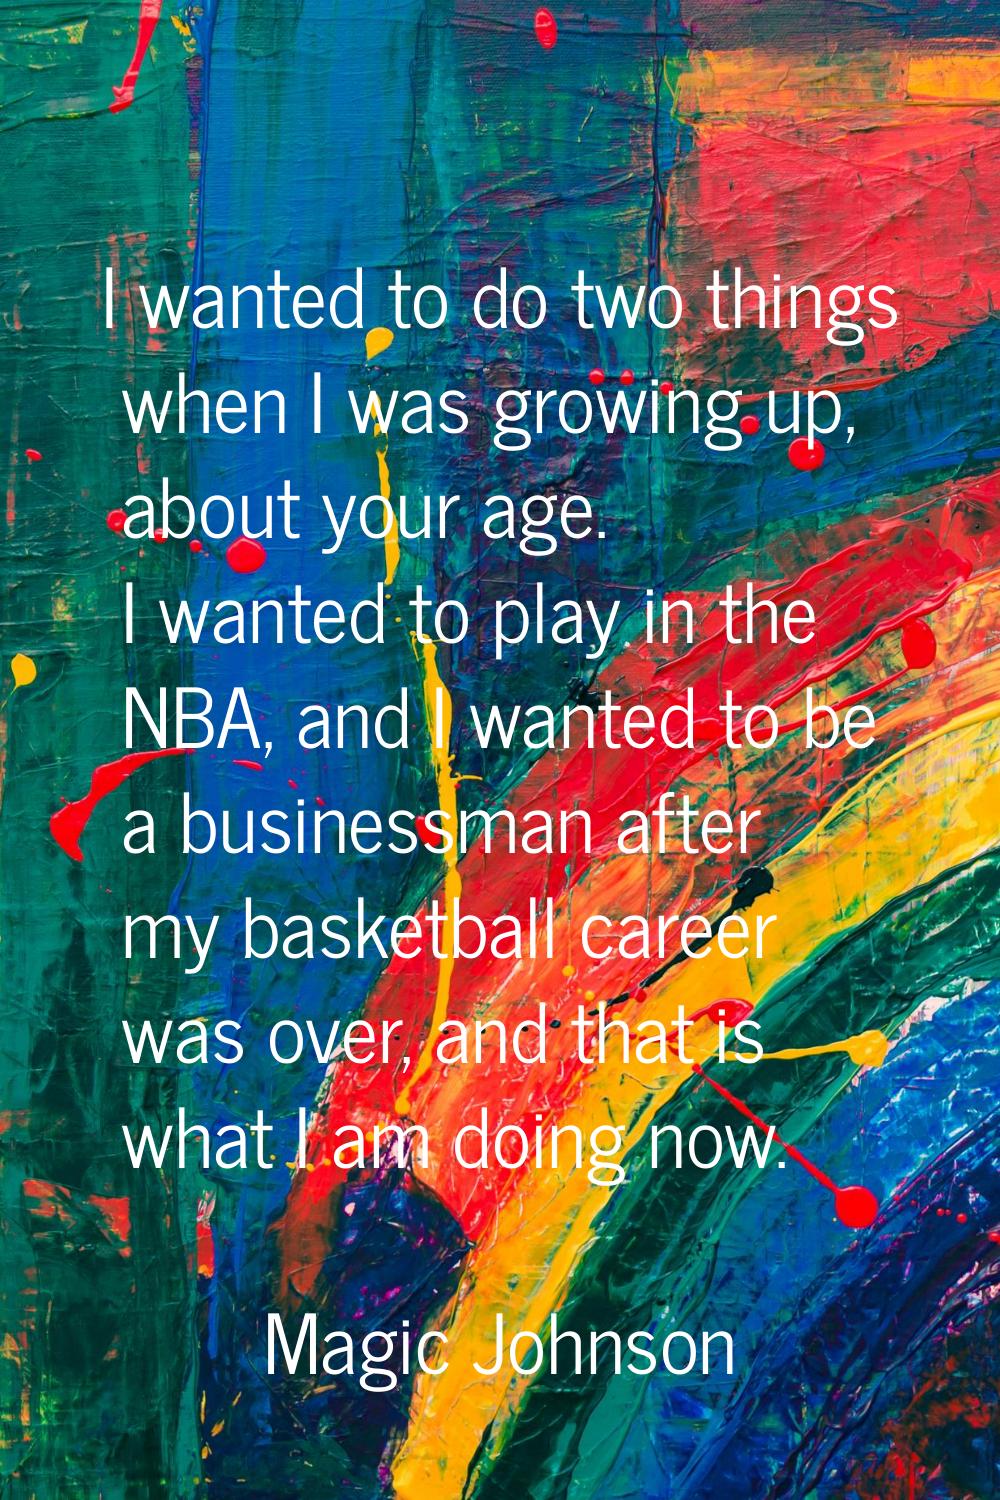 I wanted to do two things when I was growing up, about your age. I wanted to play in the NBA, and I